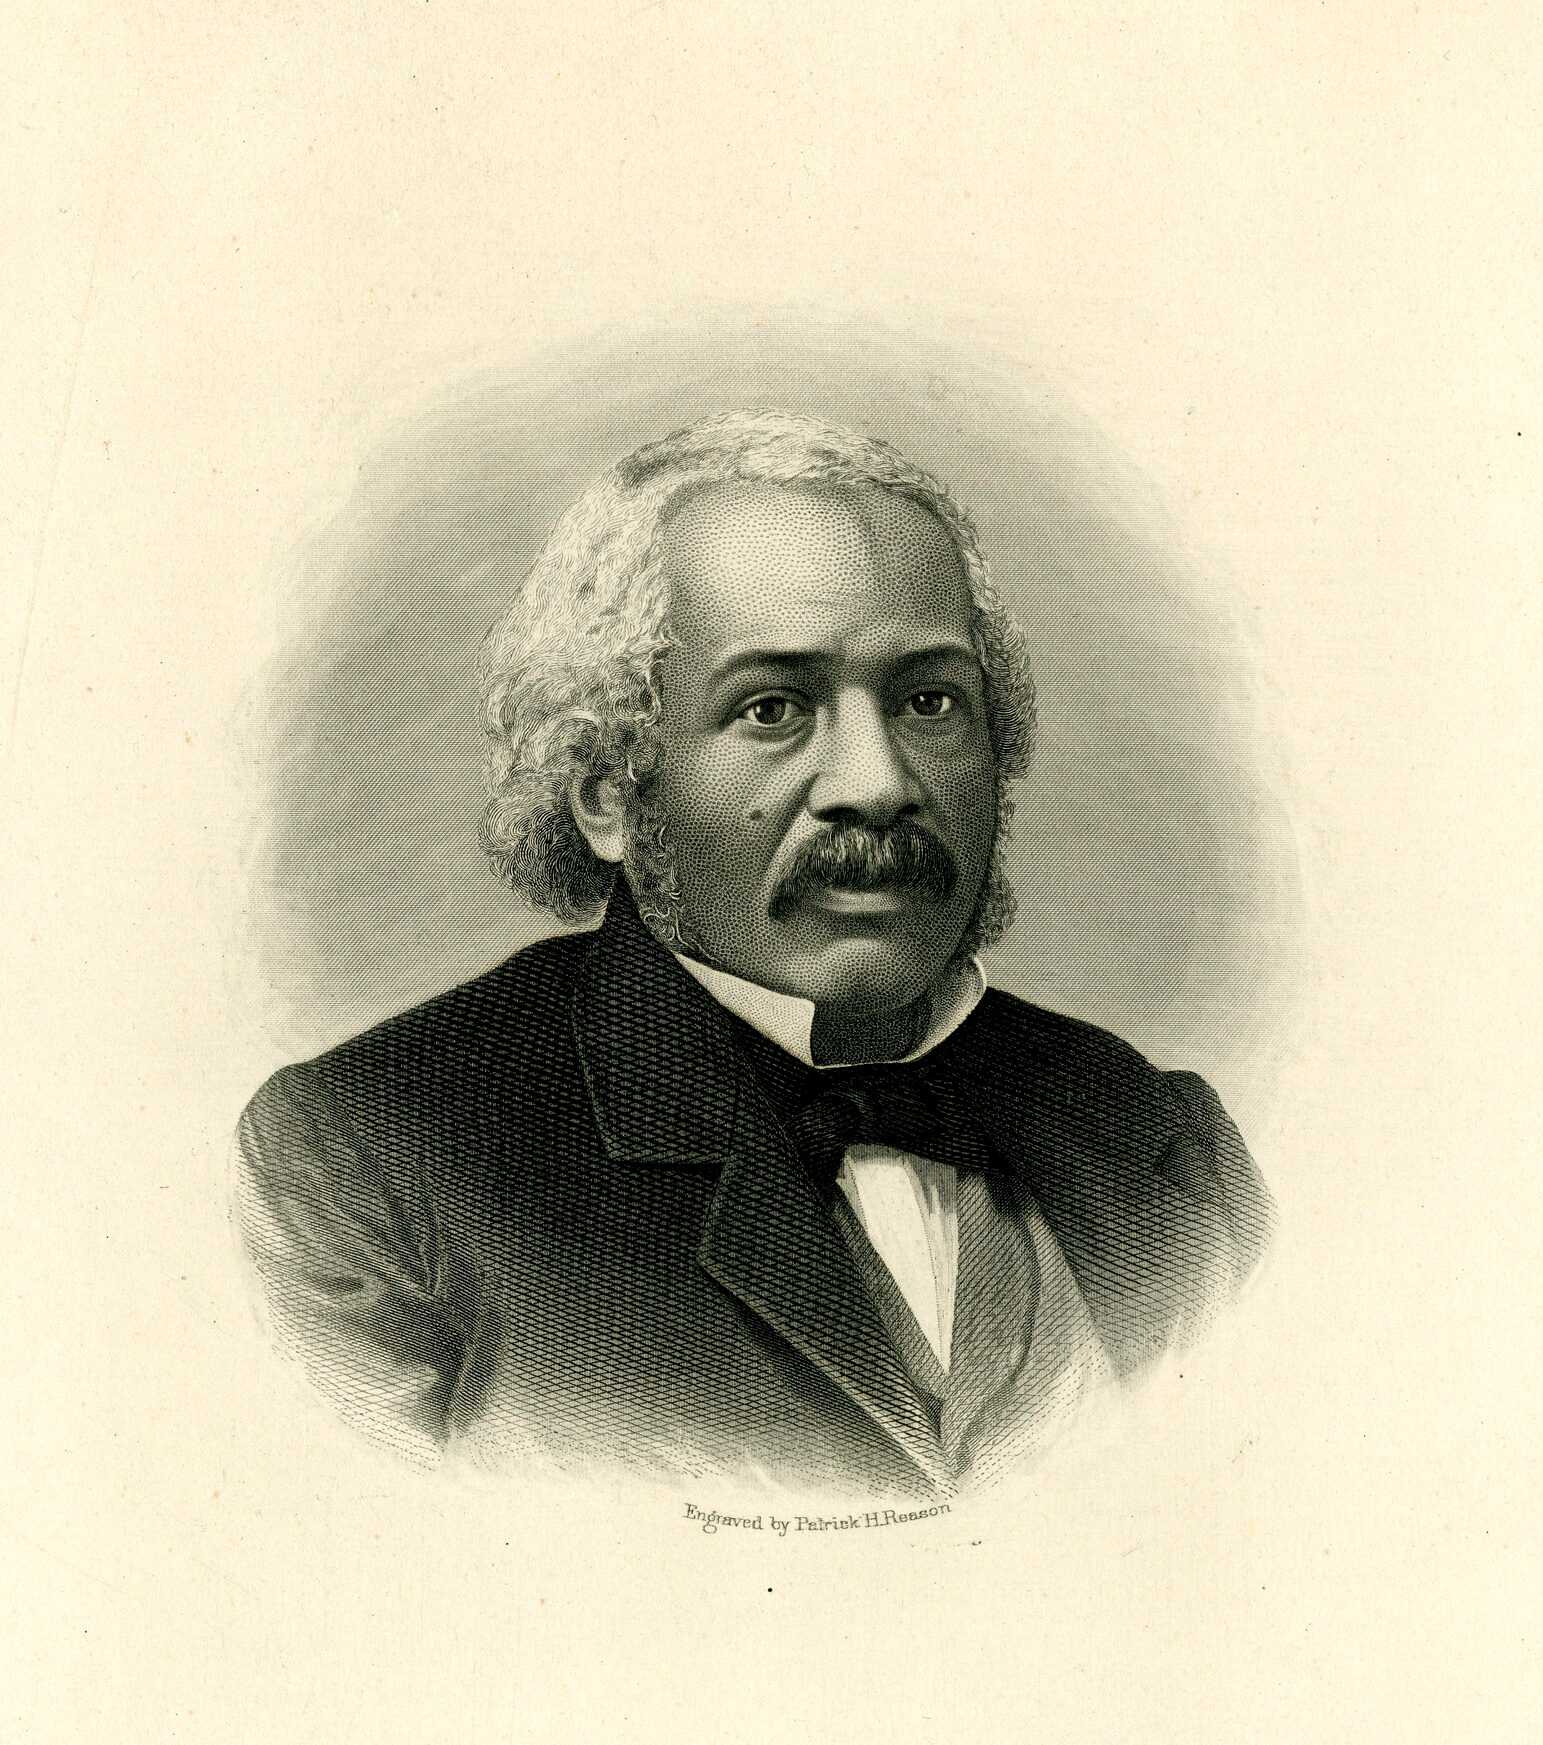 Black and white illustration of James McCune Smith